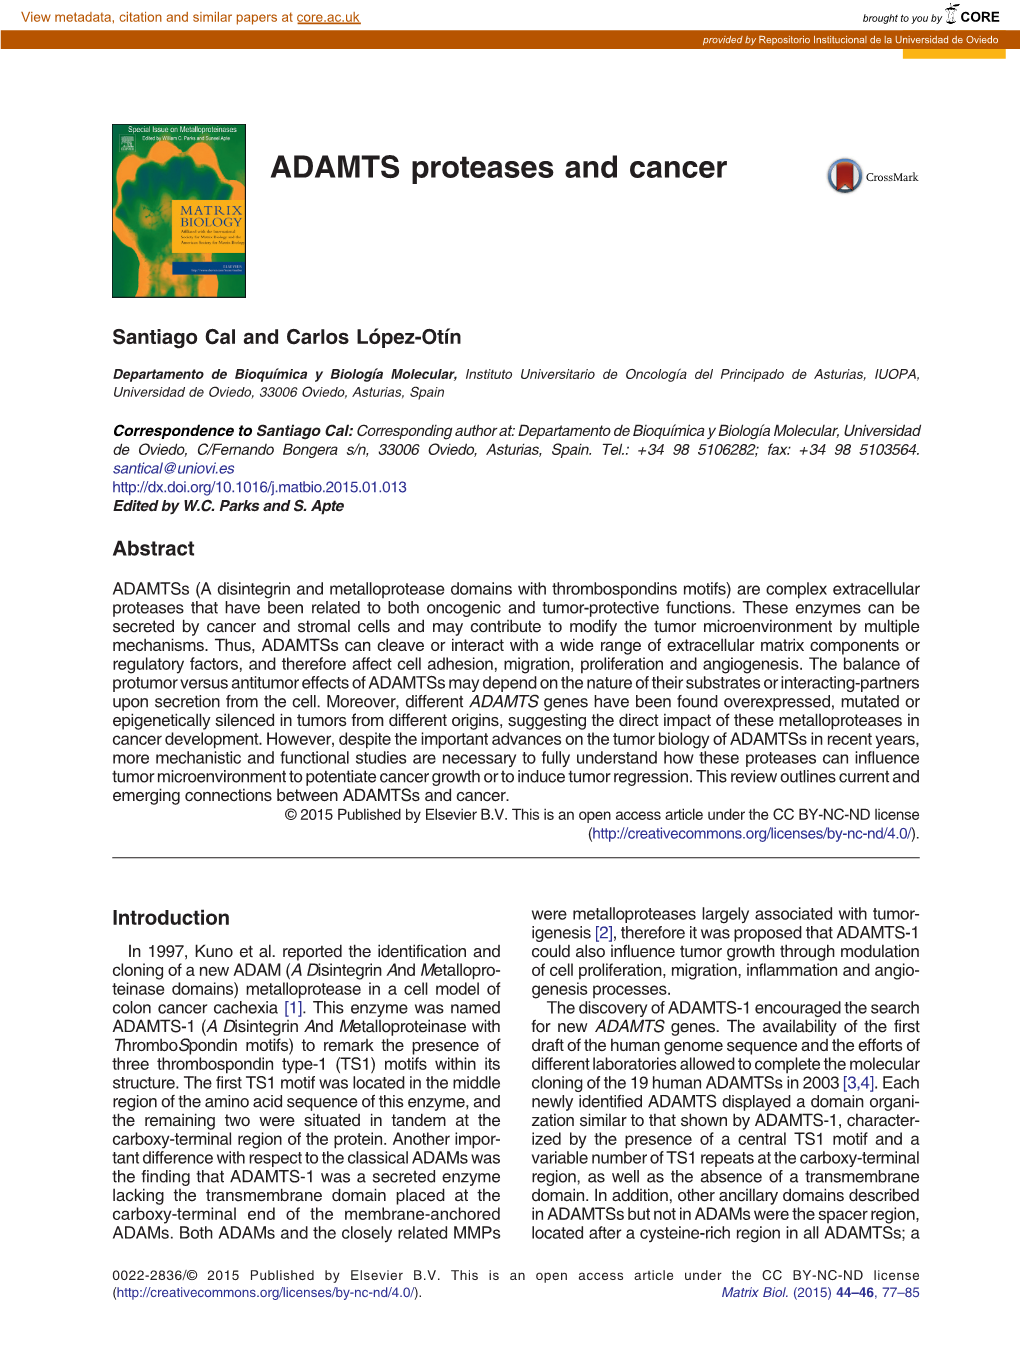 ADAMTS Proteases and Cancer